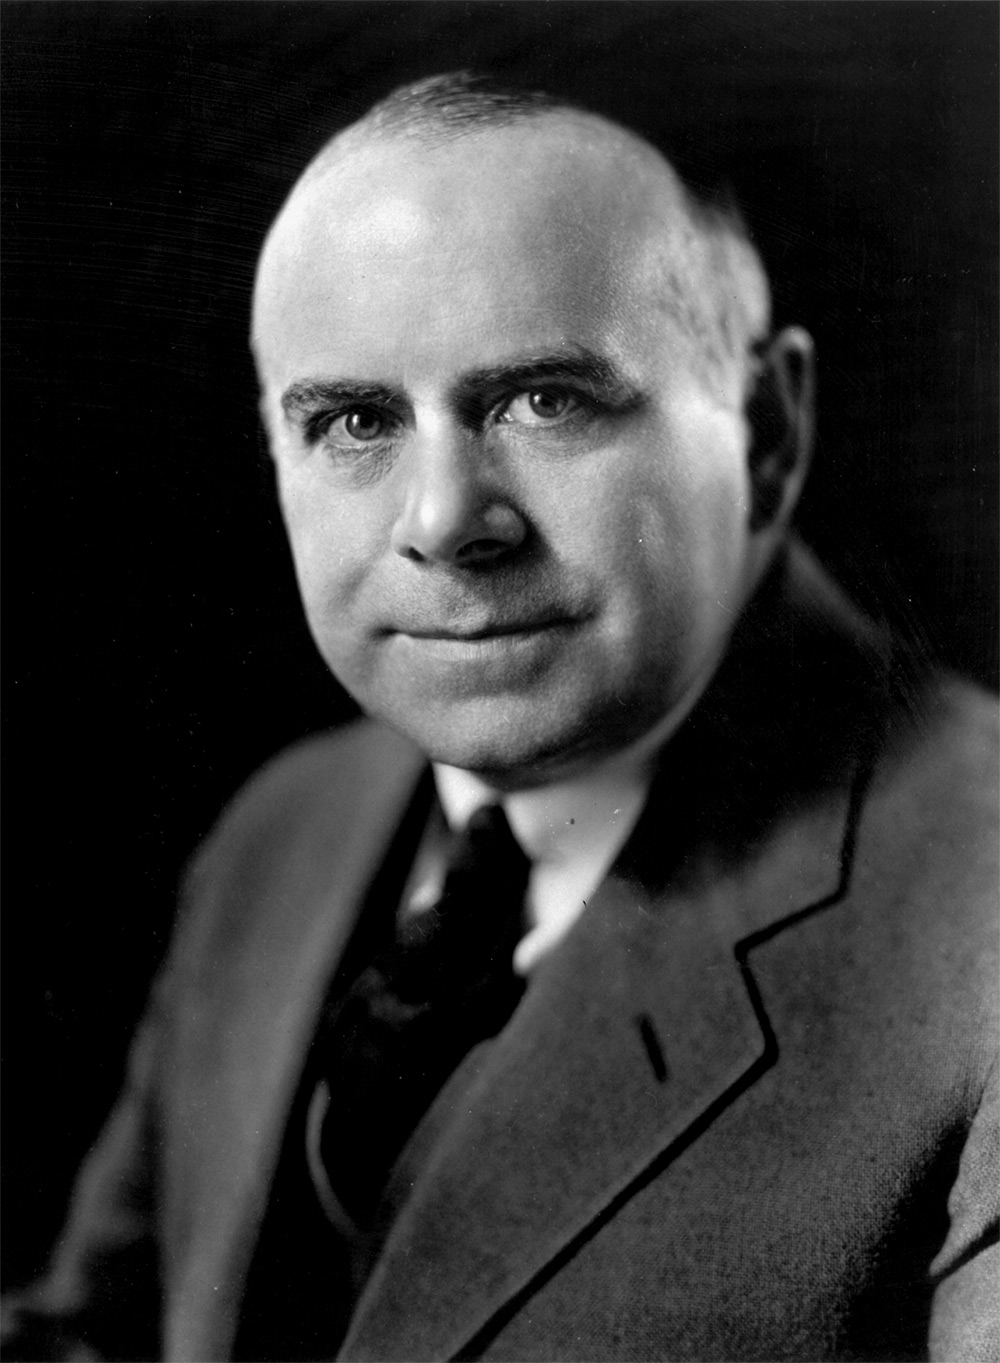 In 1926, Chief Thomas H. MacDonald of the U.S. Bureau of Public Roads joined NPS Director Mather in signing a memorandum of agreement &rquo;Relating to the Survey, Construction, and Improvement of Roads and Trails in the National Parks and National Monuments.&rquo; The agreement, updated over the years, has been providing improved access to America's treasures ever since.